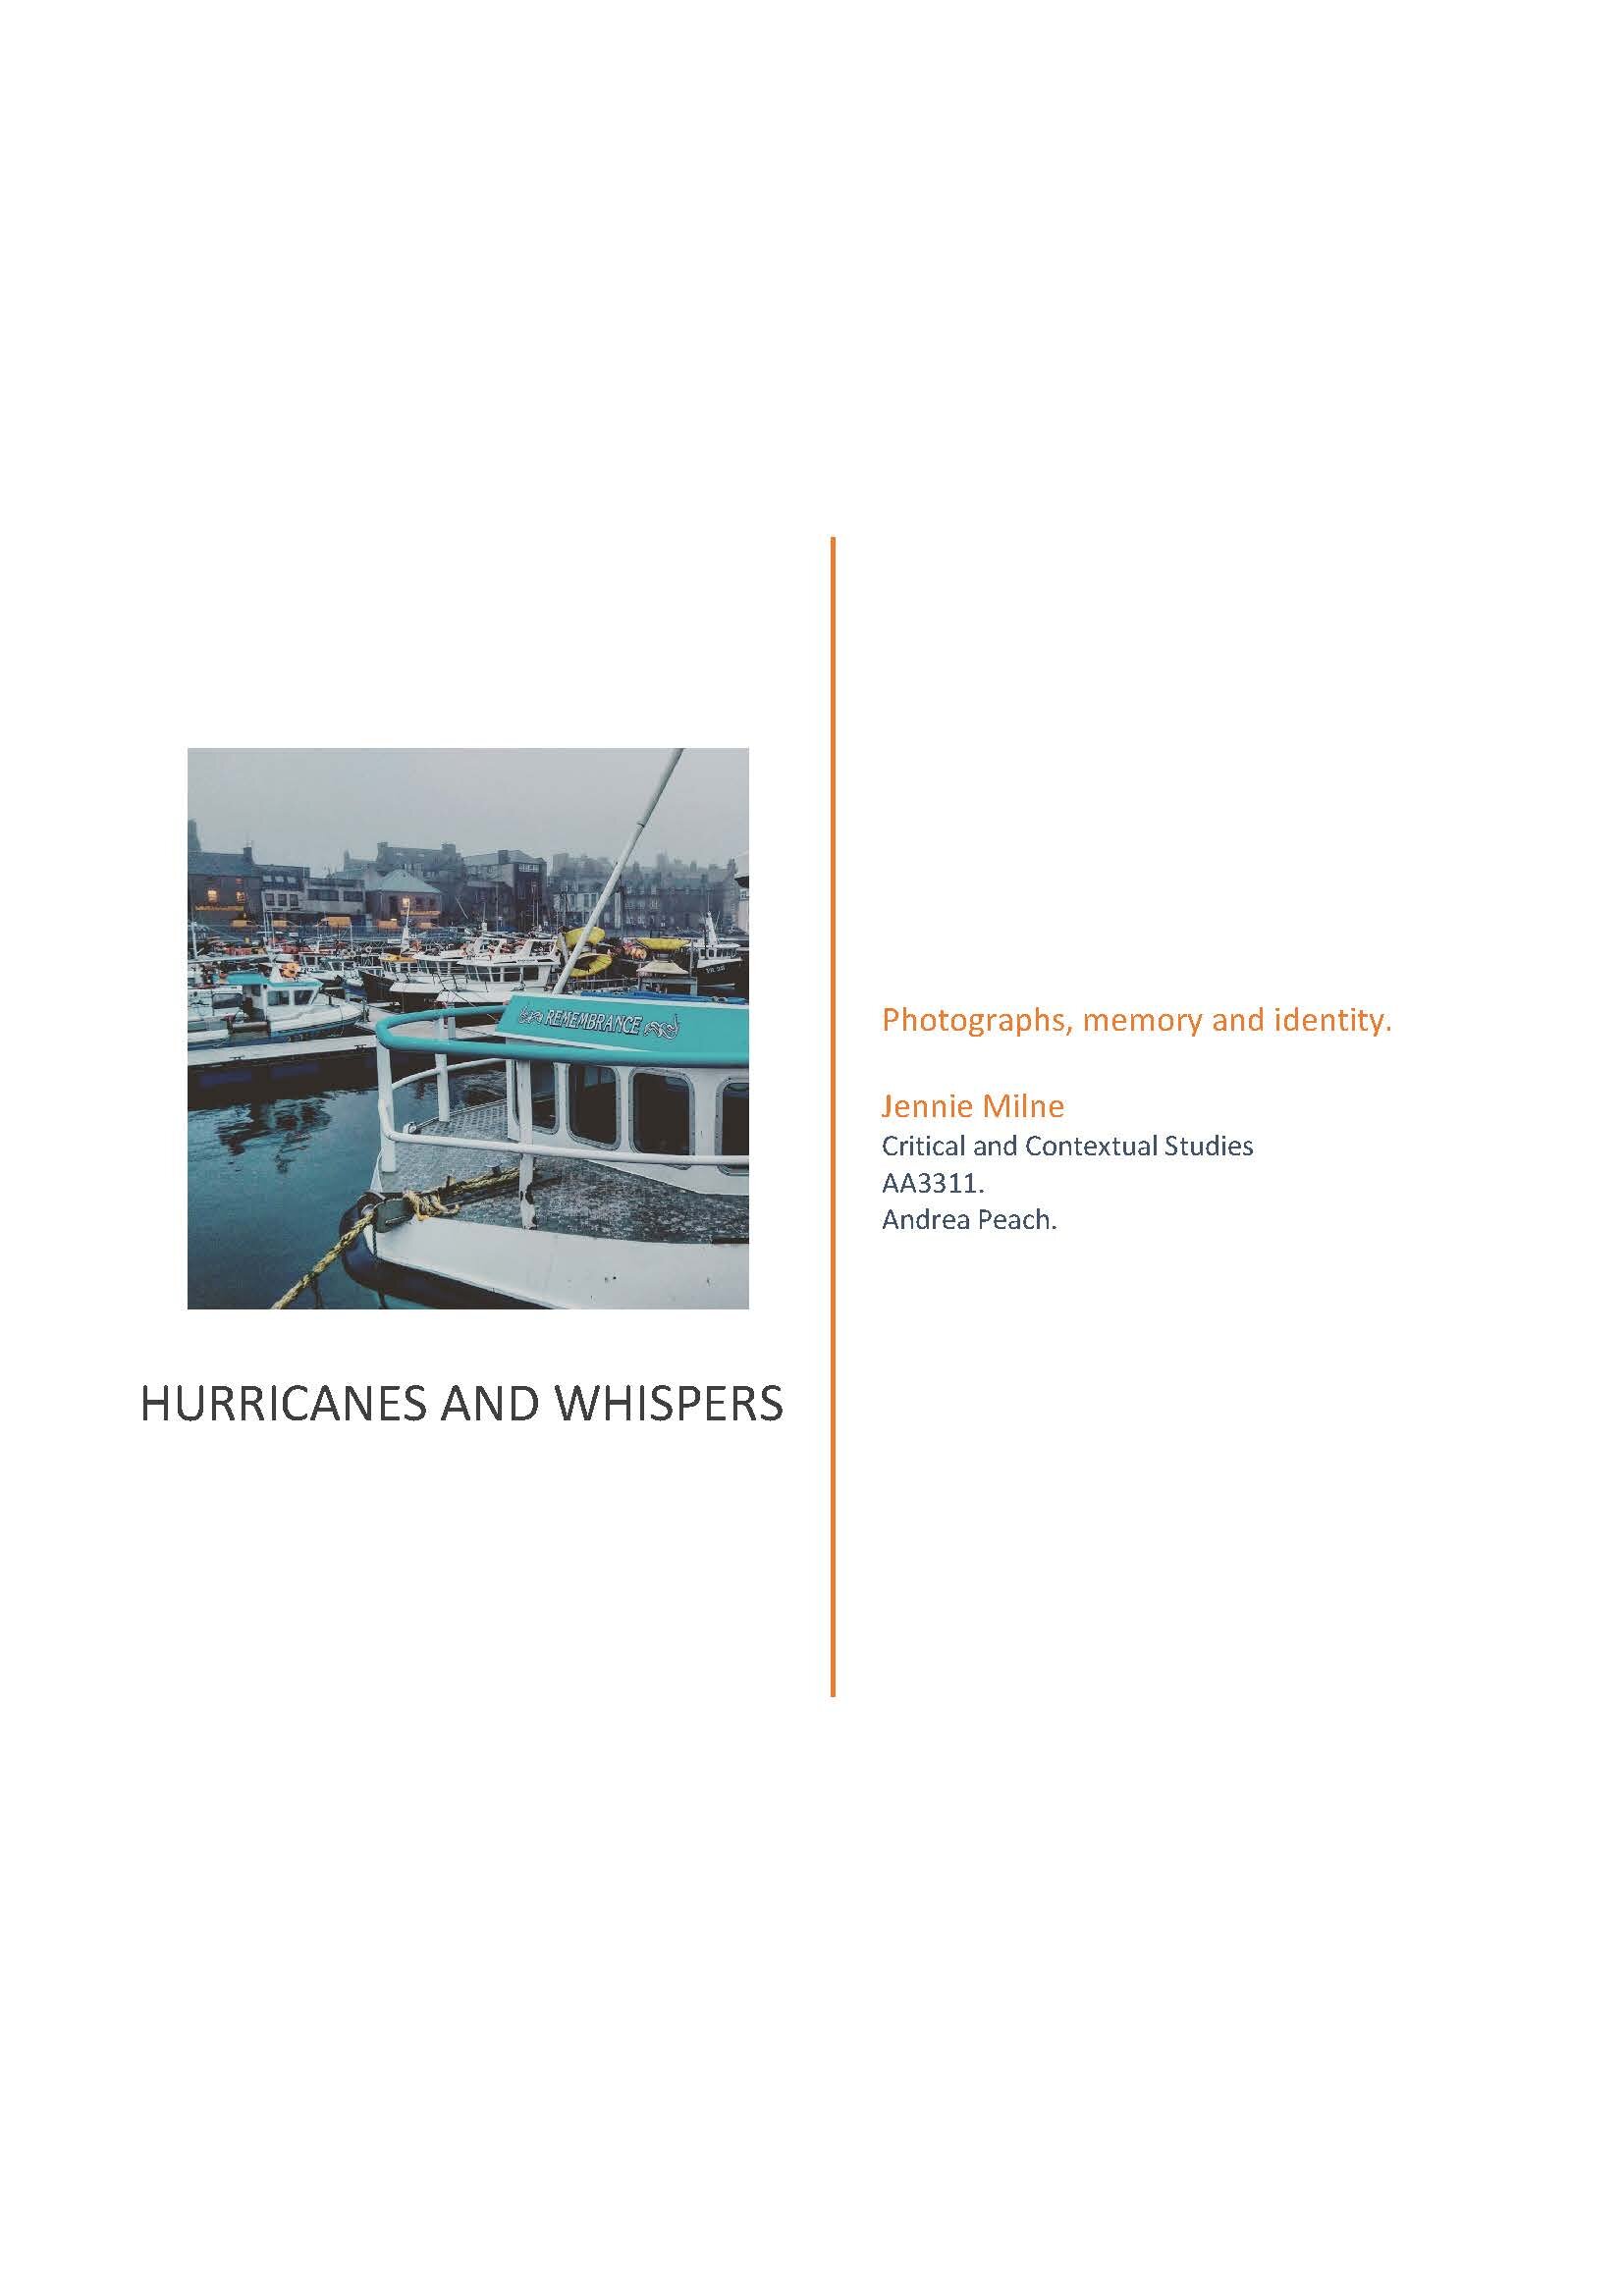 Hurricanes and Whispers Jennie Milne 2018_Page_01.jpg